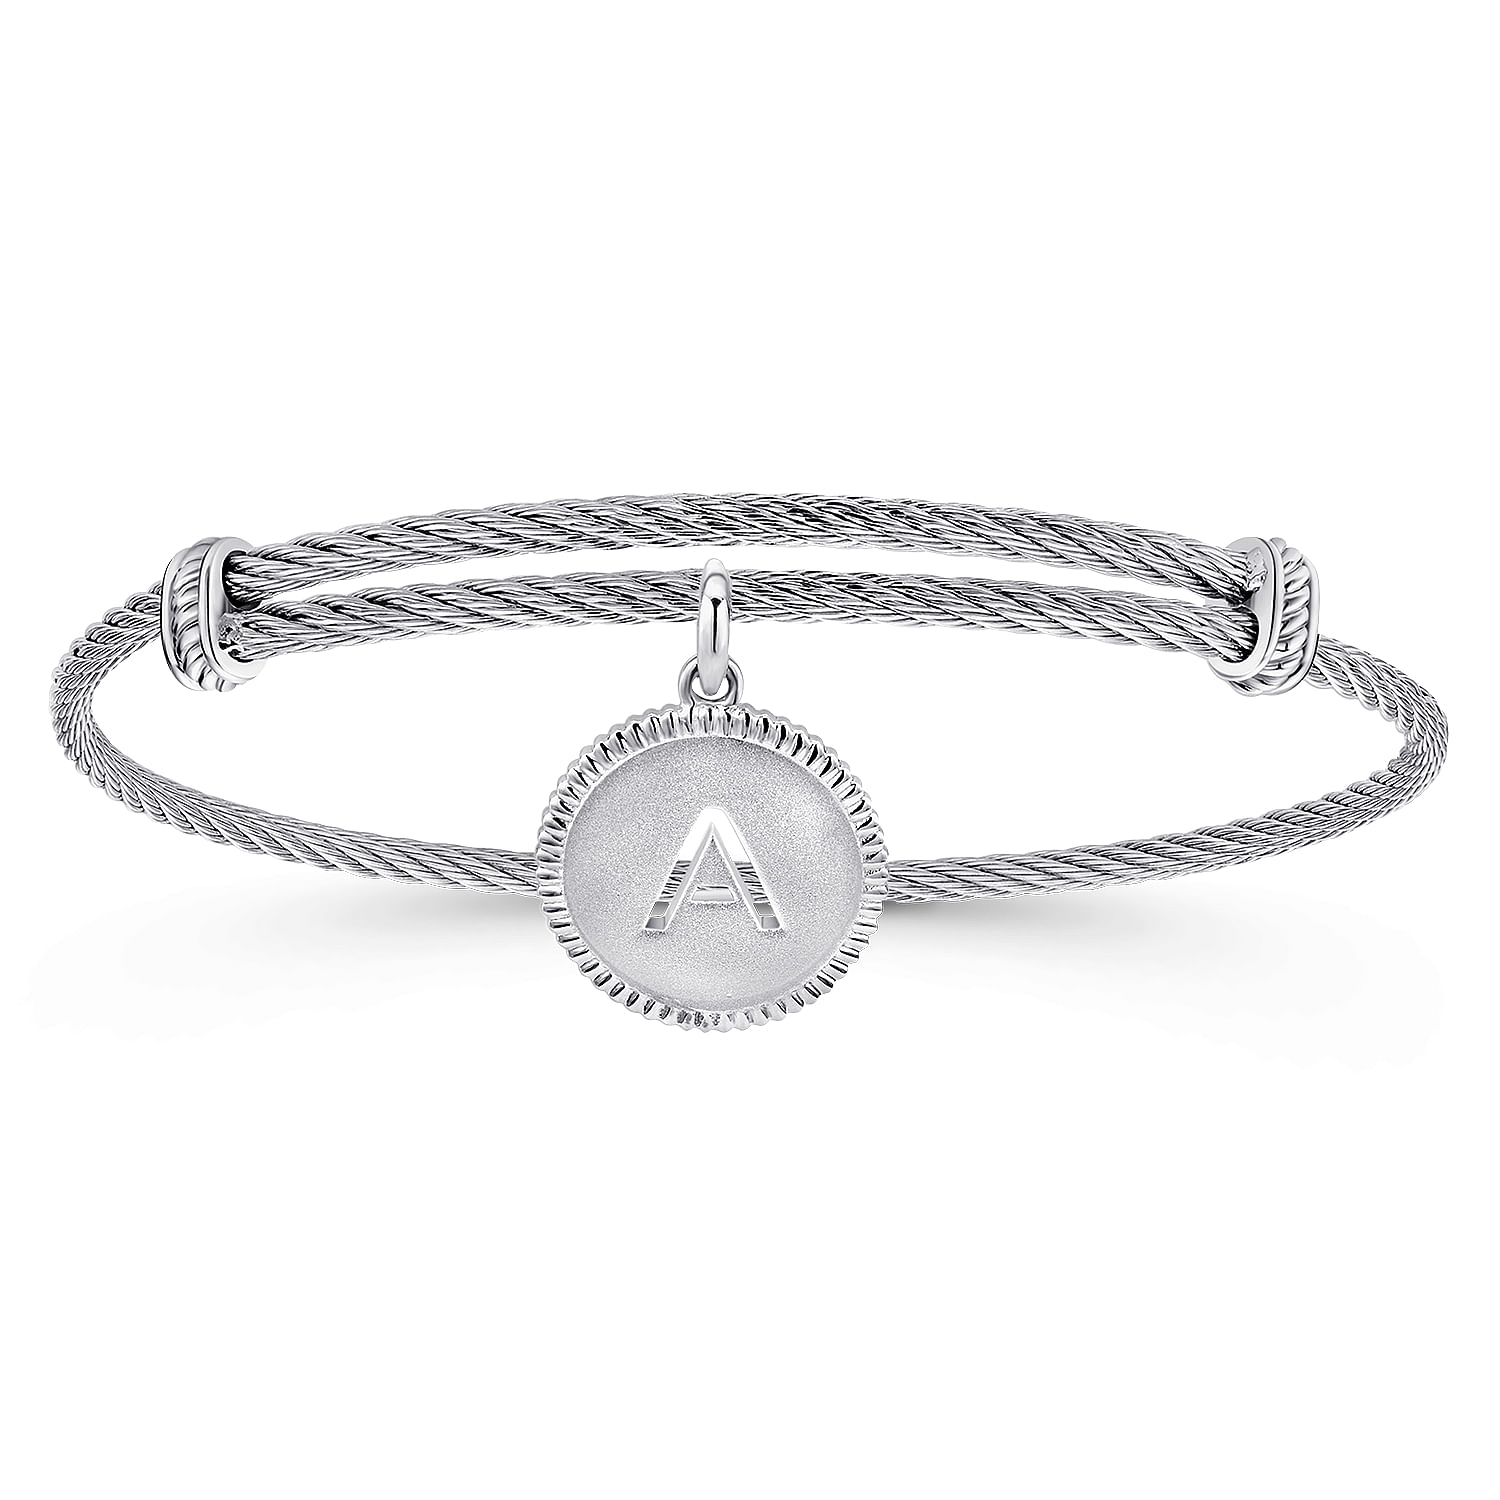 Adjustable-Twisted-Cable-Stainless-Steel-Bangle-with-Sterling-Silver-A-Initial-Charm1